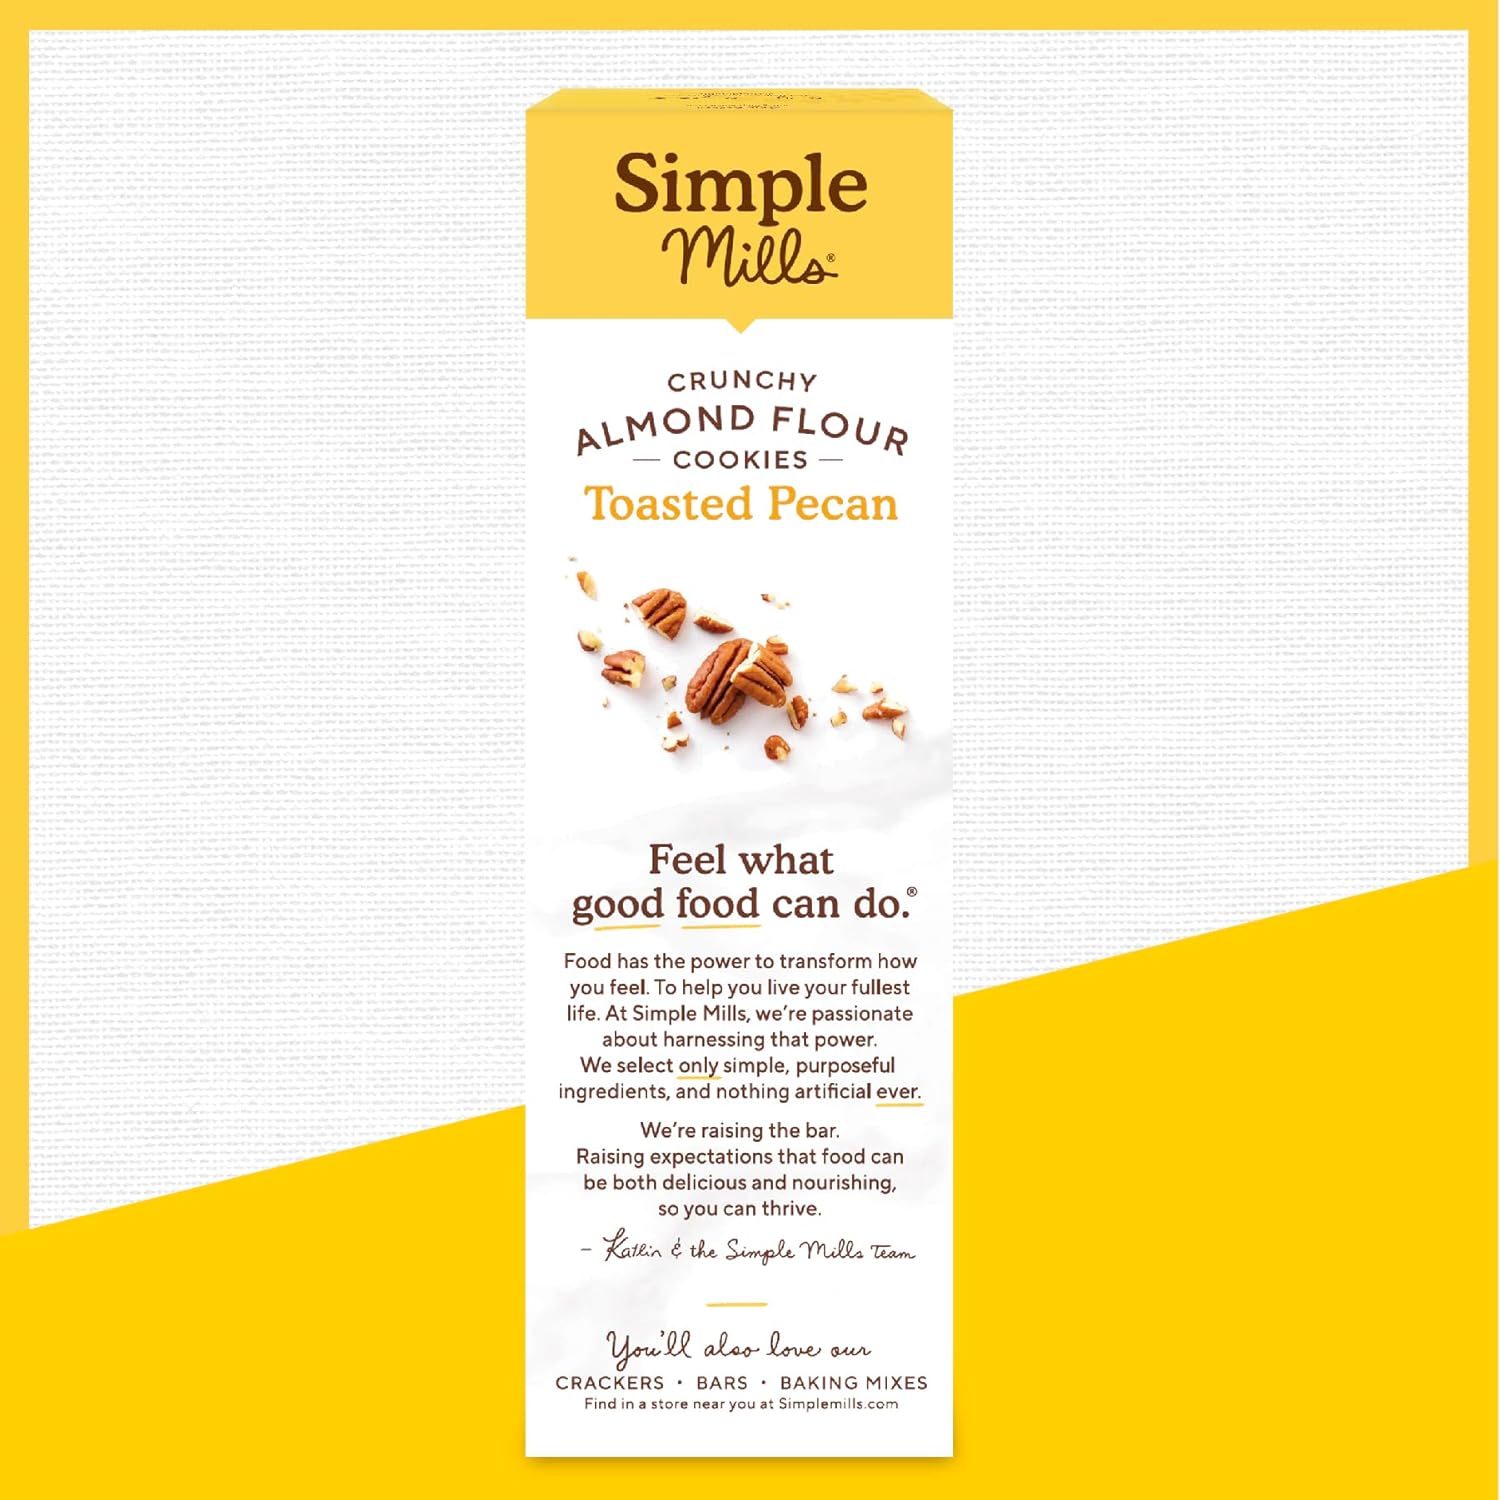 Simple Mills Almond Flour Crunchy Cookies, Toasted Pecan - Gluten Free, Vegan, Healthy Snacks, Made with Organic Coconut Oil, 5.5 Ounce (Pack of 1) : Grocery & Gourmet Food